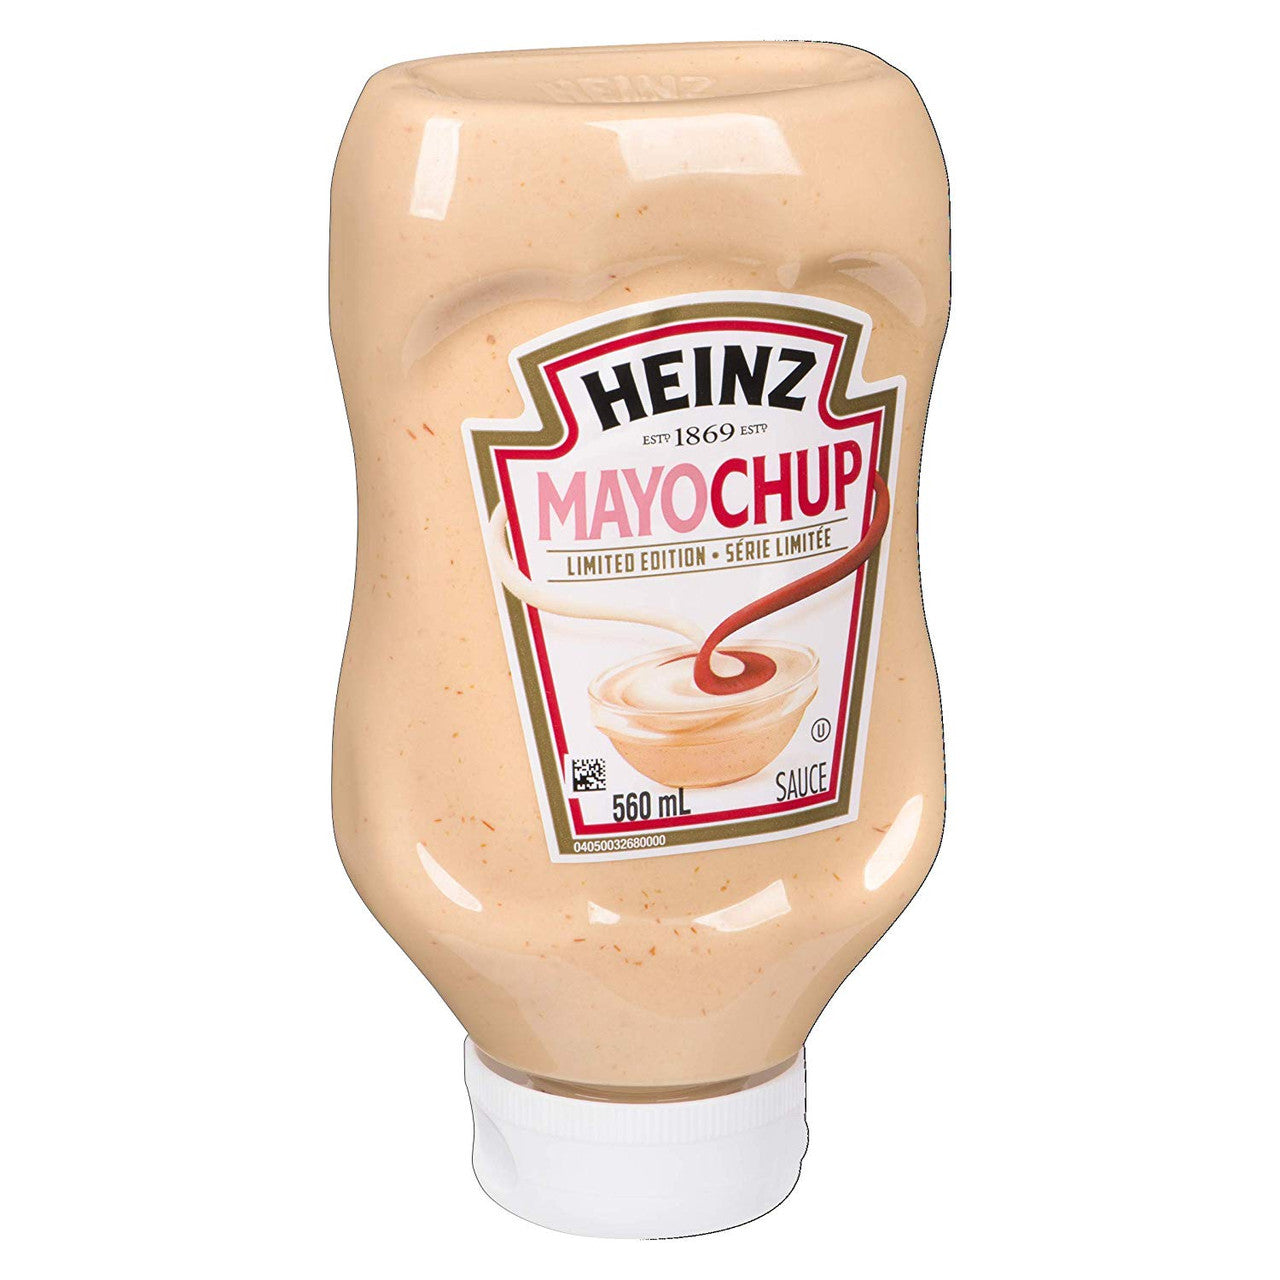 Heinz Mayochup Sauce, 560mL/18.9oz, Bottle, Limited Canadian Edition, (Imported from Canada)